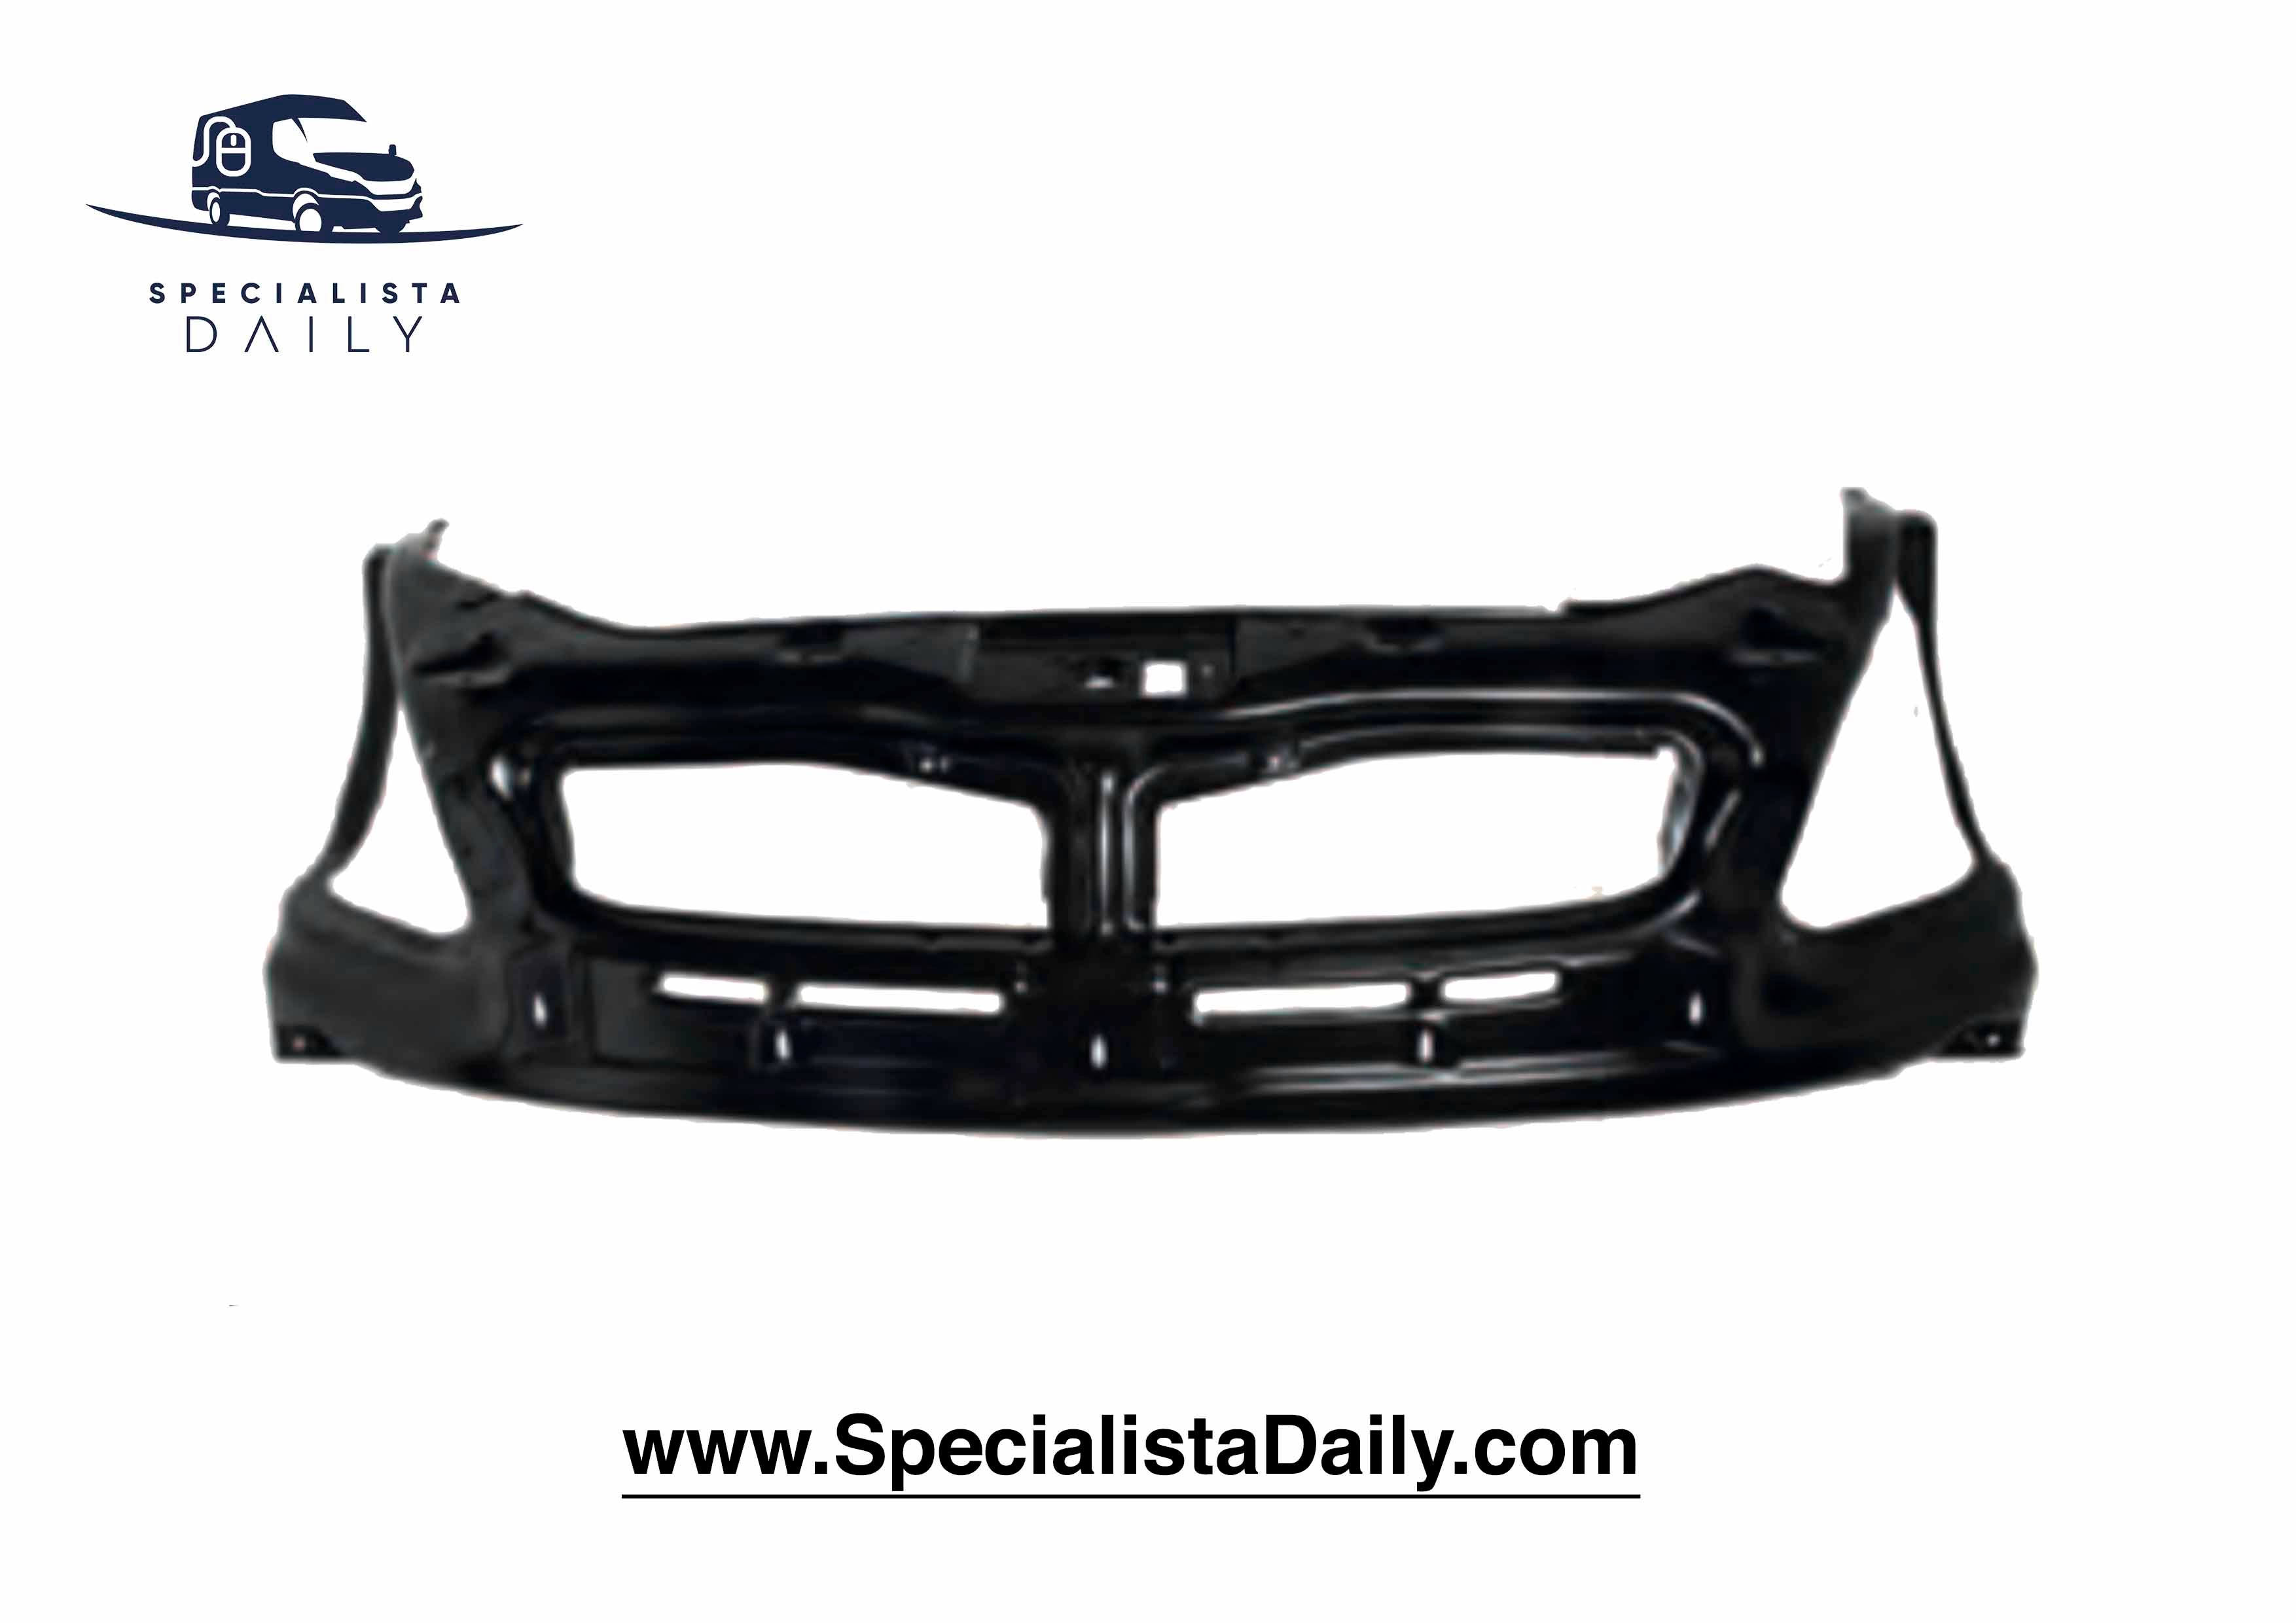 Frontale Anteriore Iveco Daily 2006 - 3800059 - Specialista Daily